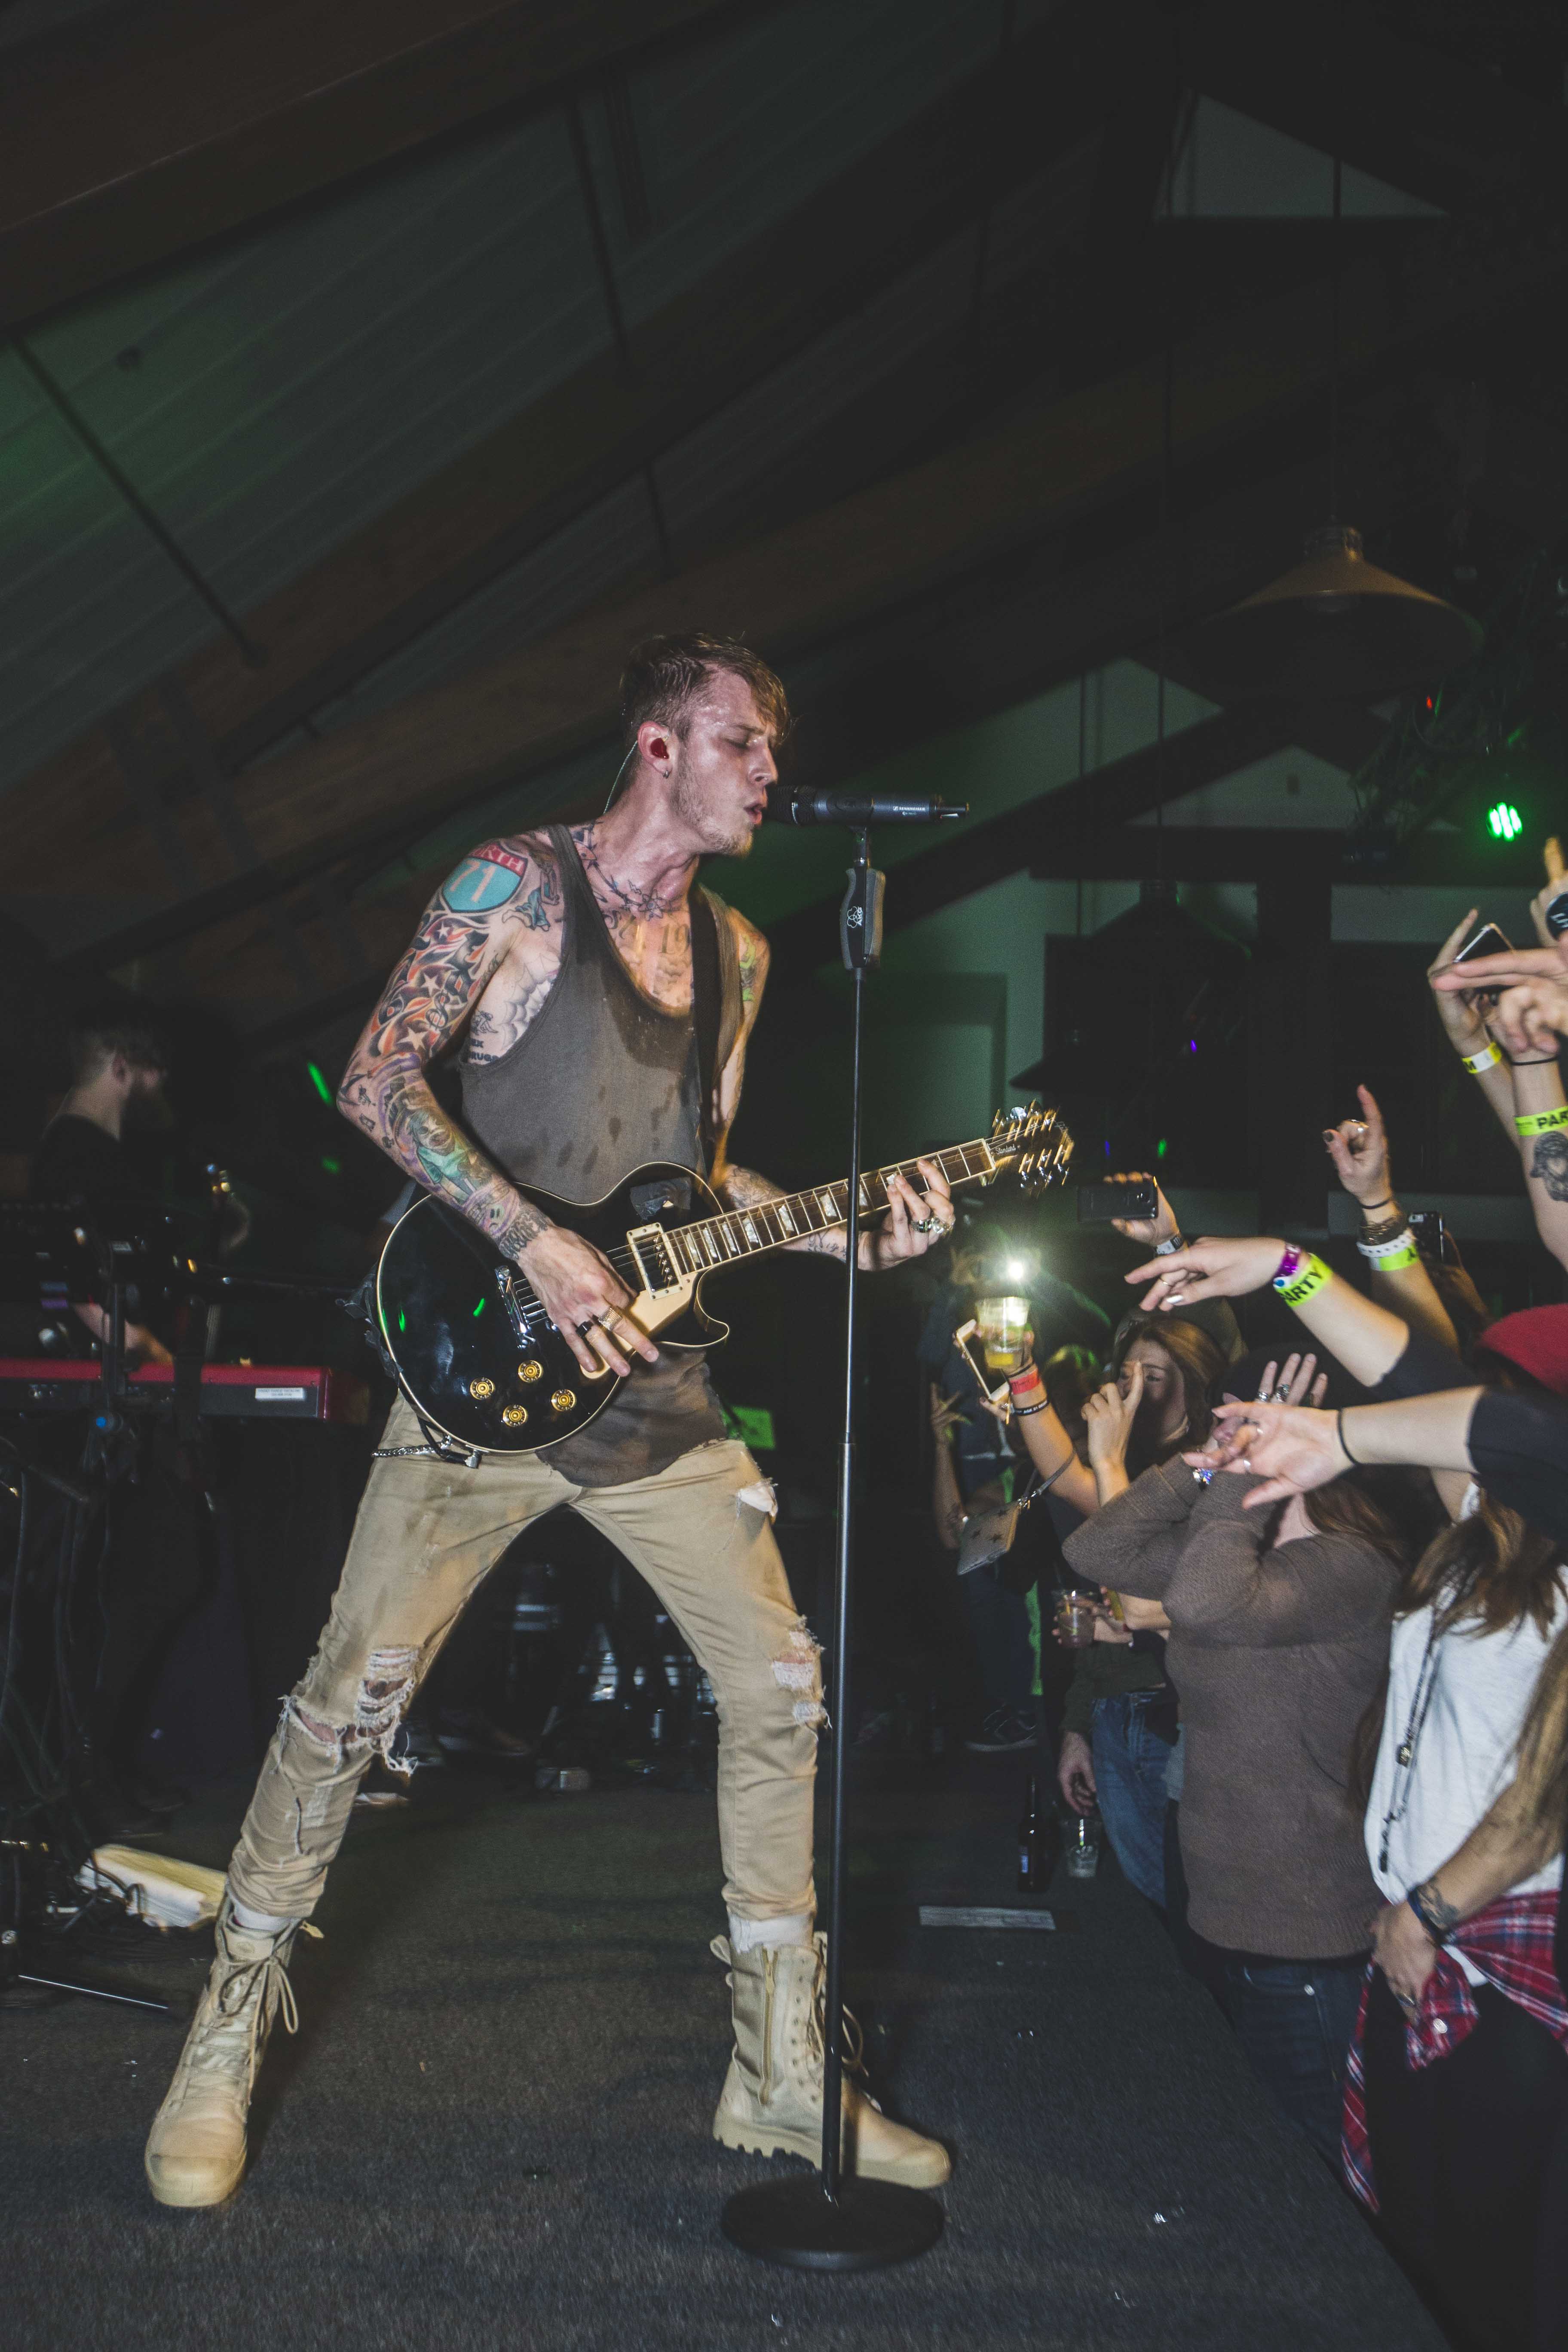 Monster Energy X Games Aspen 2016 Celebration Party With Machine Gun Kelly